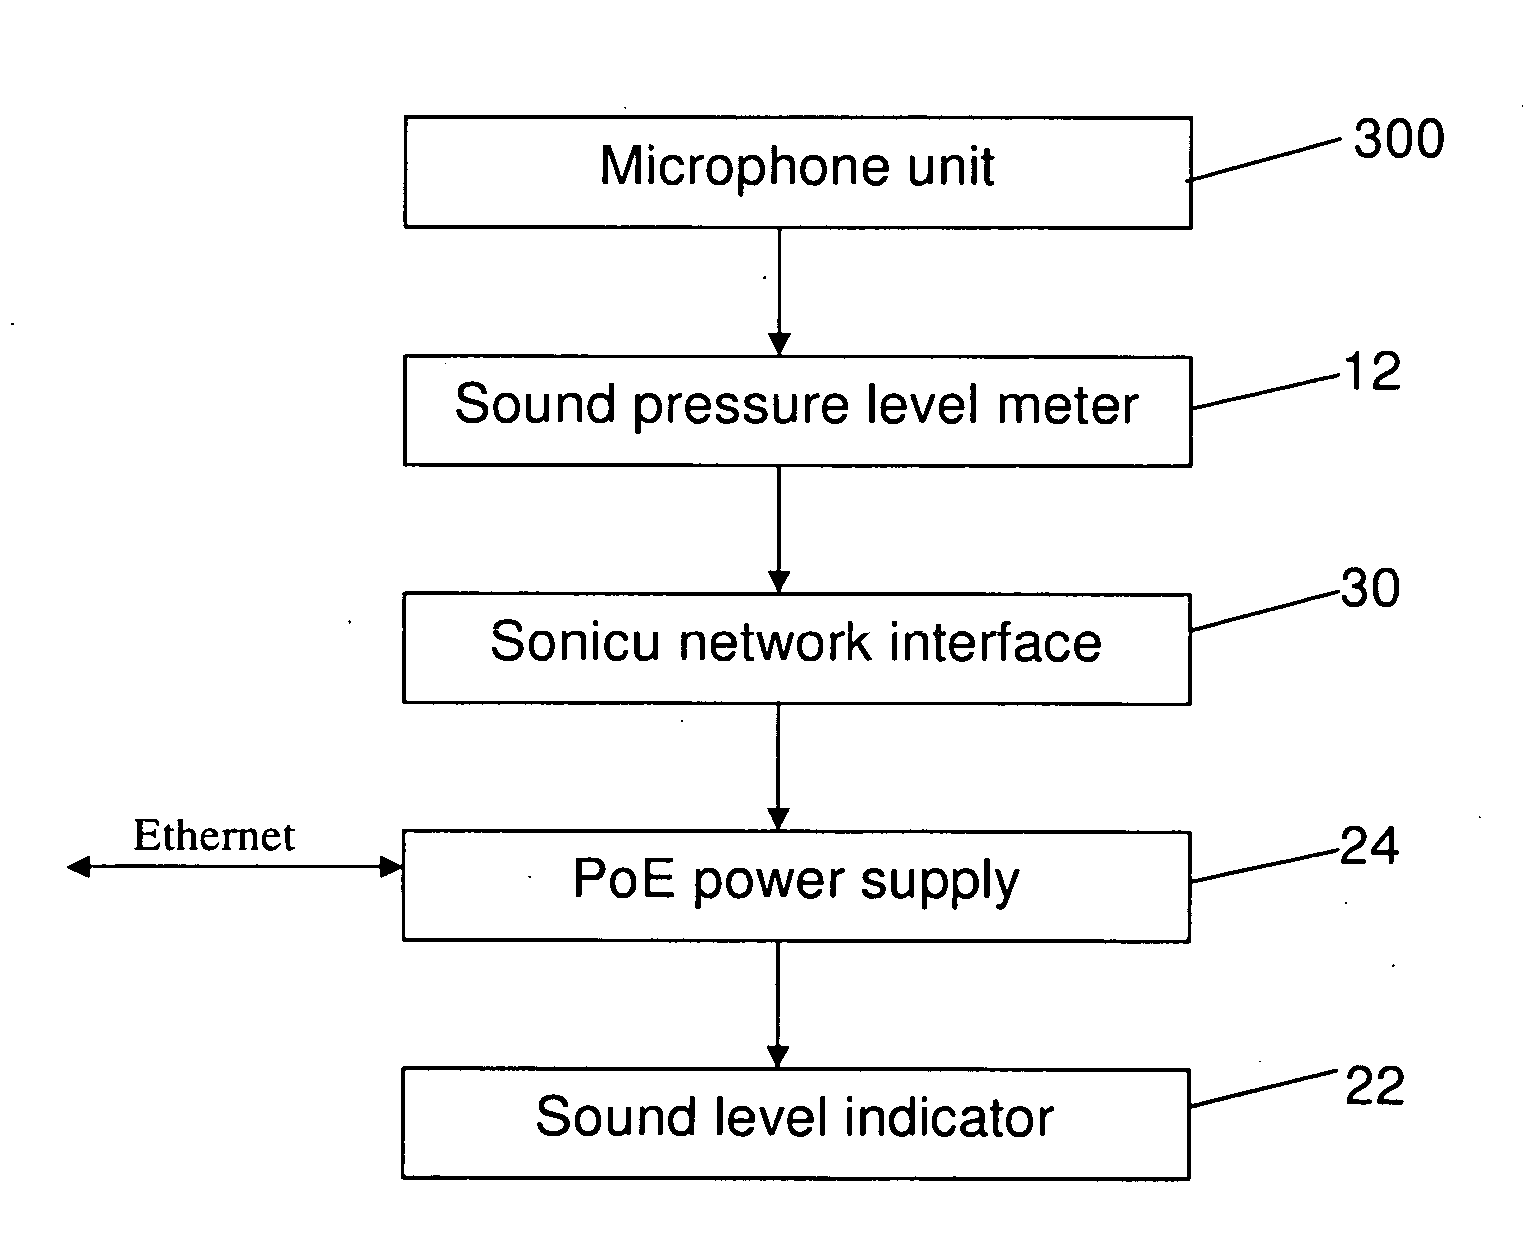 Sound monitoring, data collection and advisory system